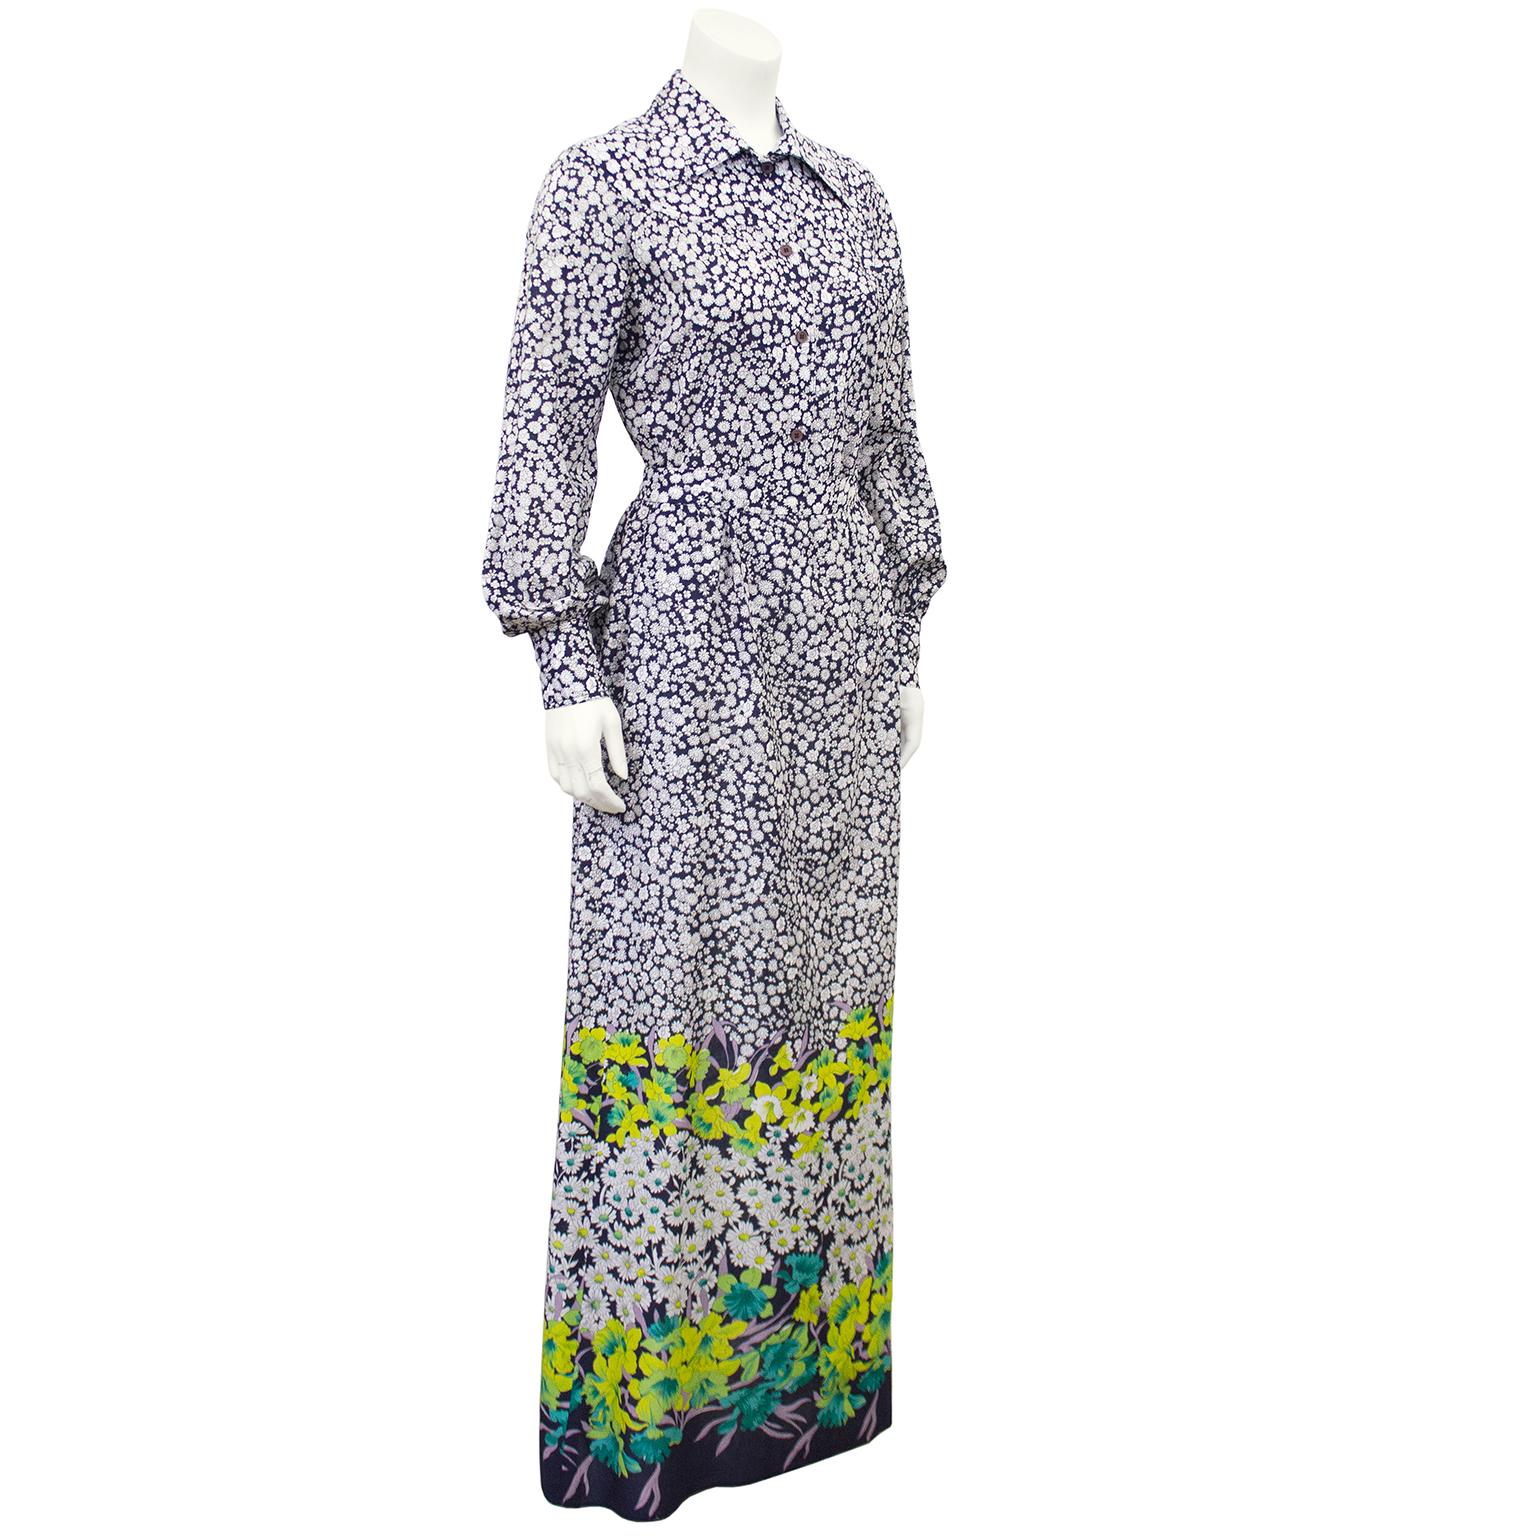 1970s Rizkallah for Malcolm Starr cotton navy, white and green chintz floral printed maxi skirt ensemble. Youssef Rizkallah designed for Malcolm Starr from 1969 to 1975. The long sleeve button down top is navy with an all over chintz print of white